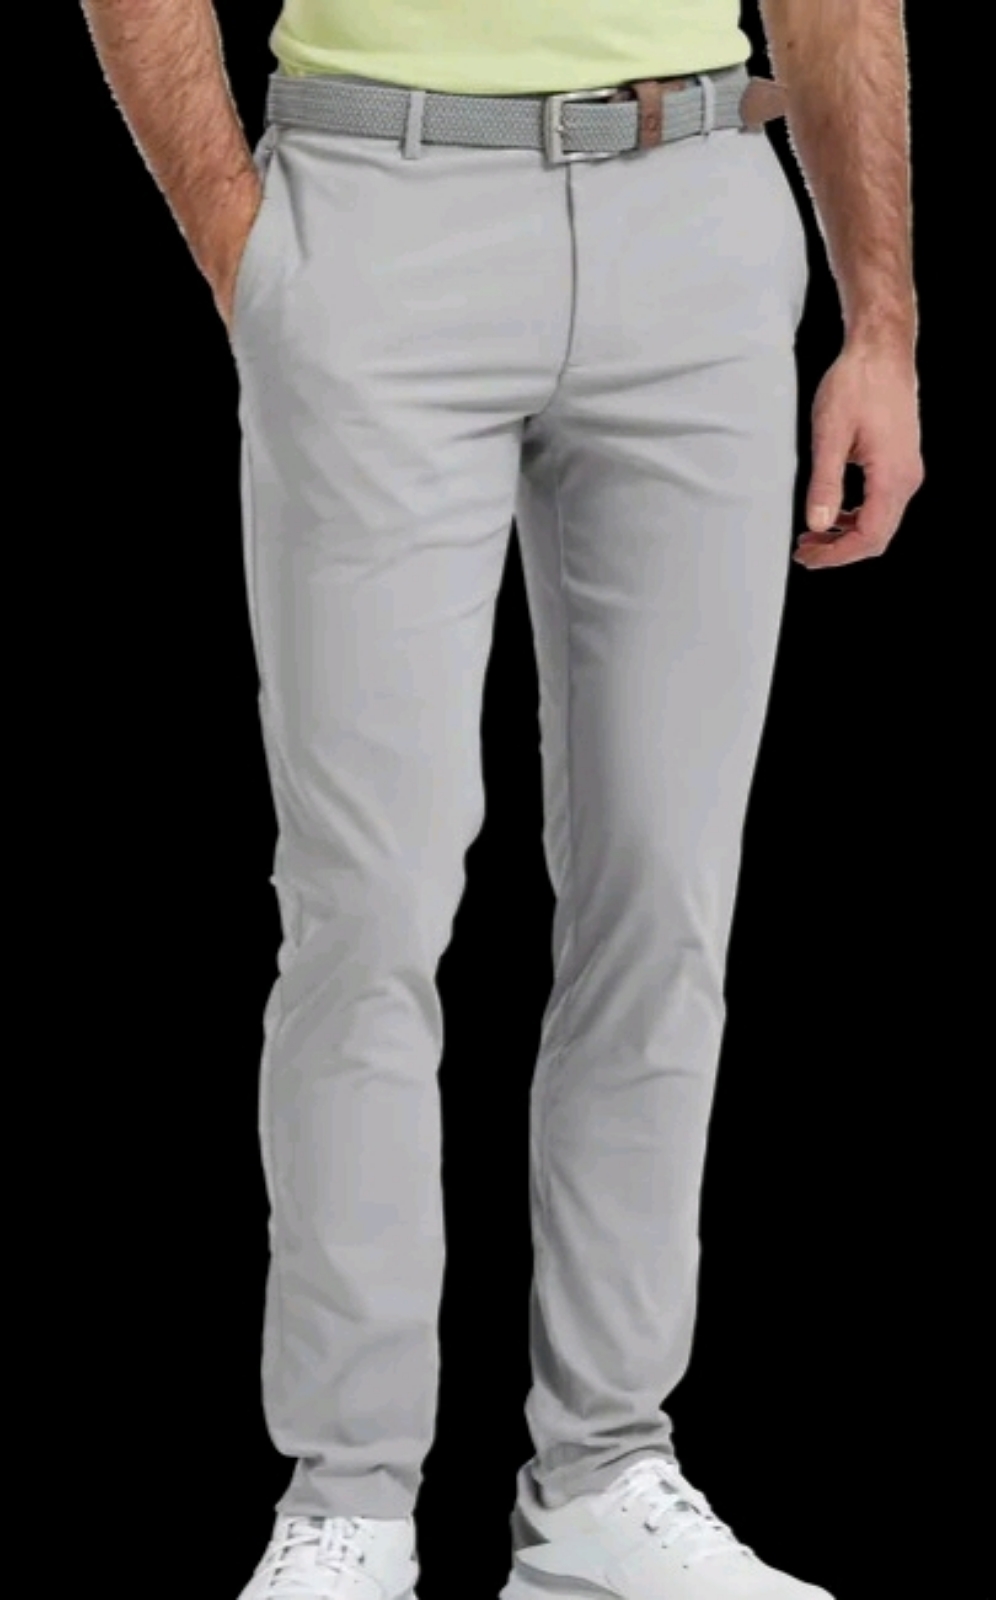 2023 FJ Golf Pants are available now in Gray Or Black or Khaki or Navy Colors!